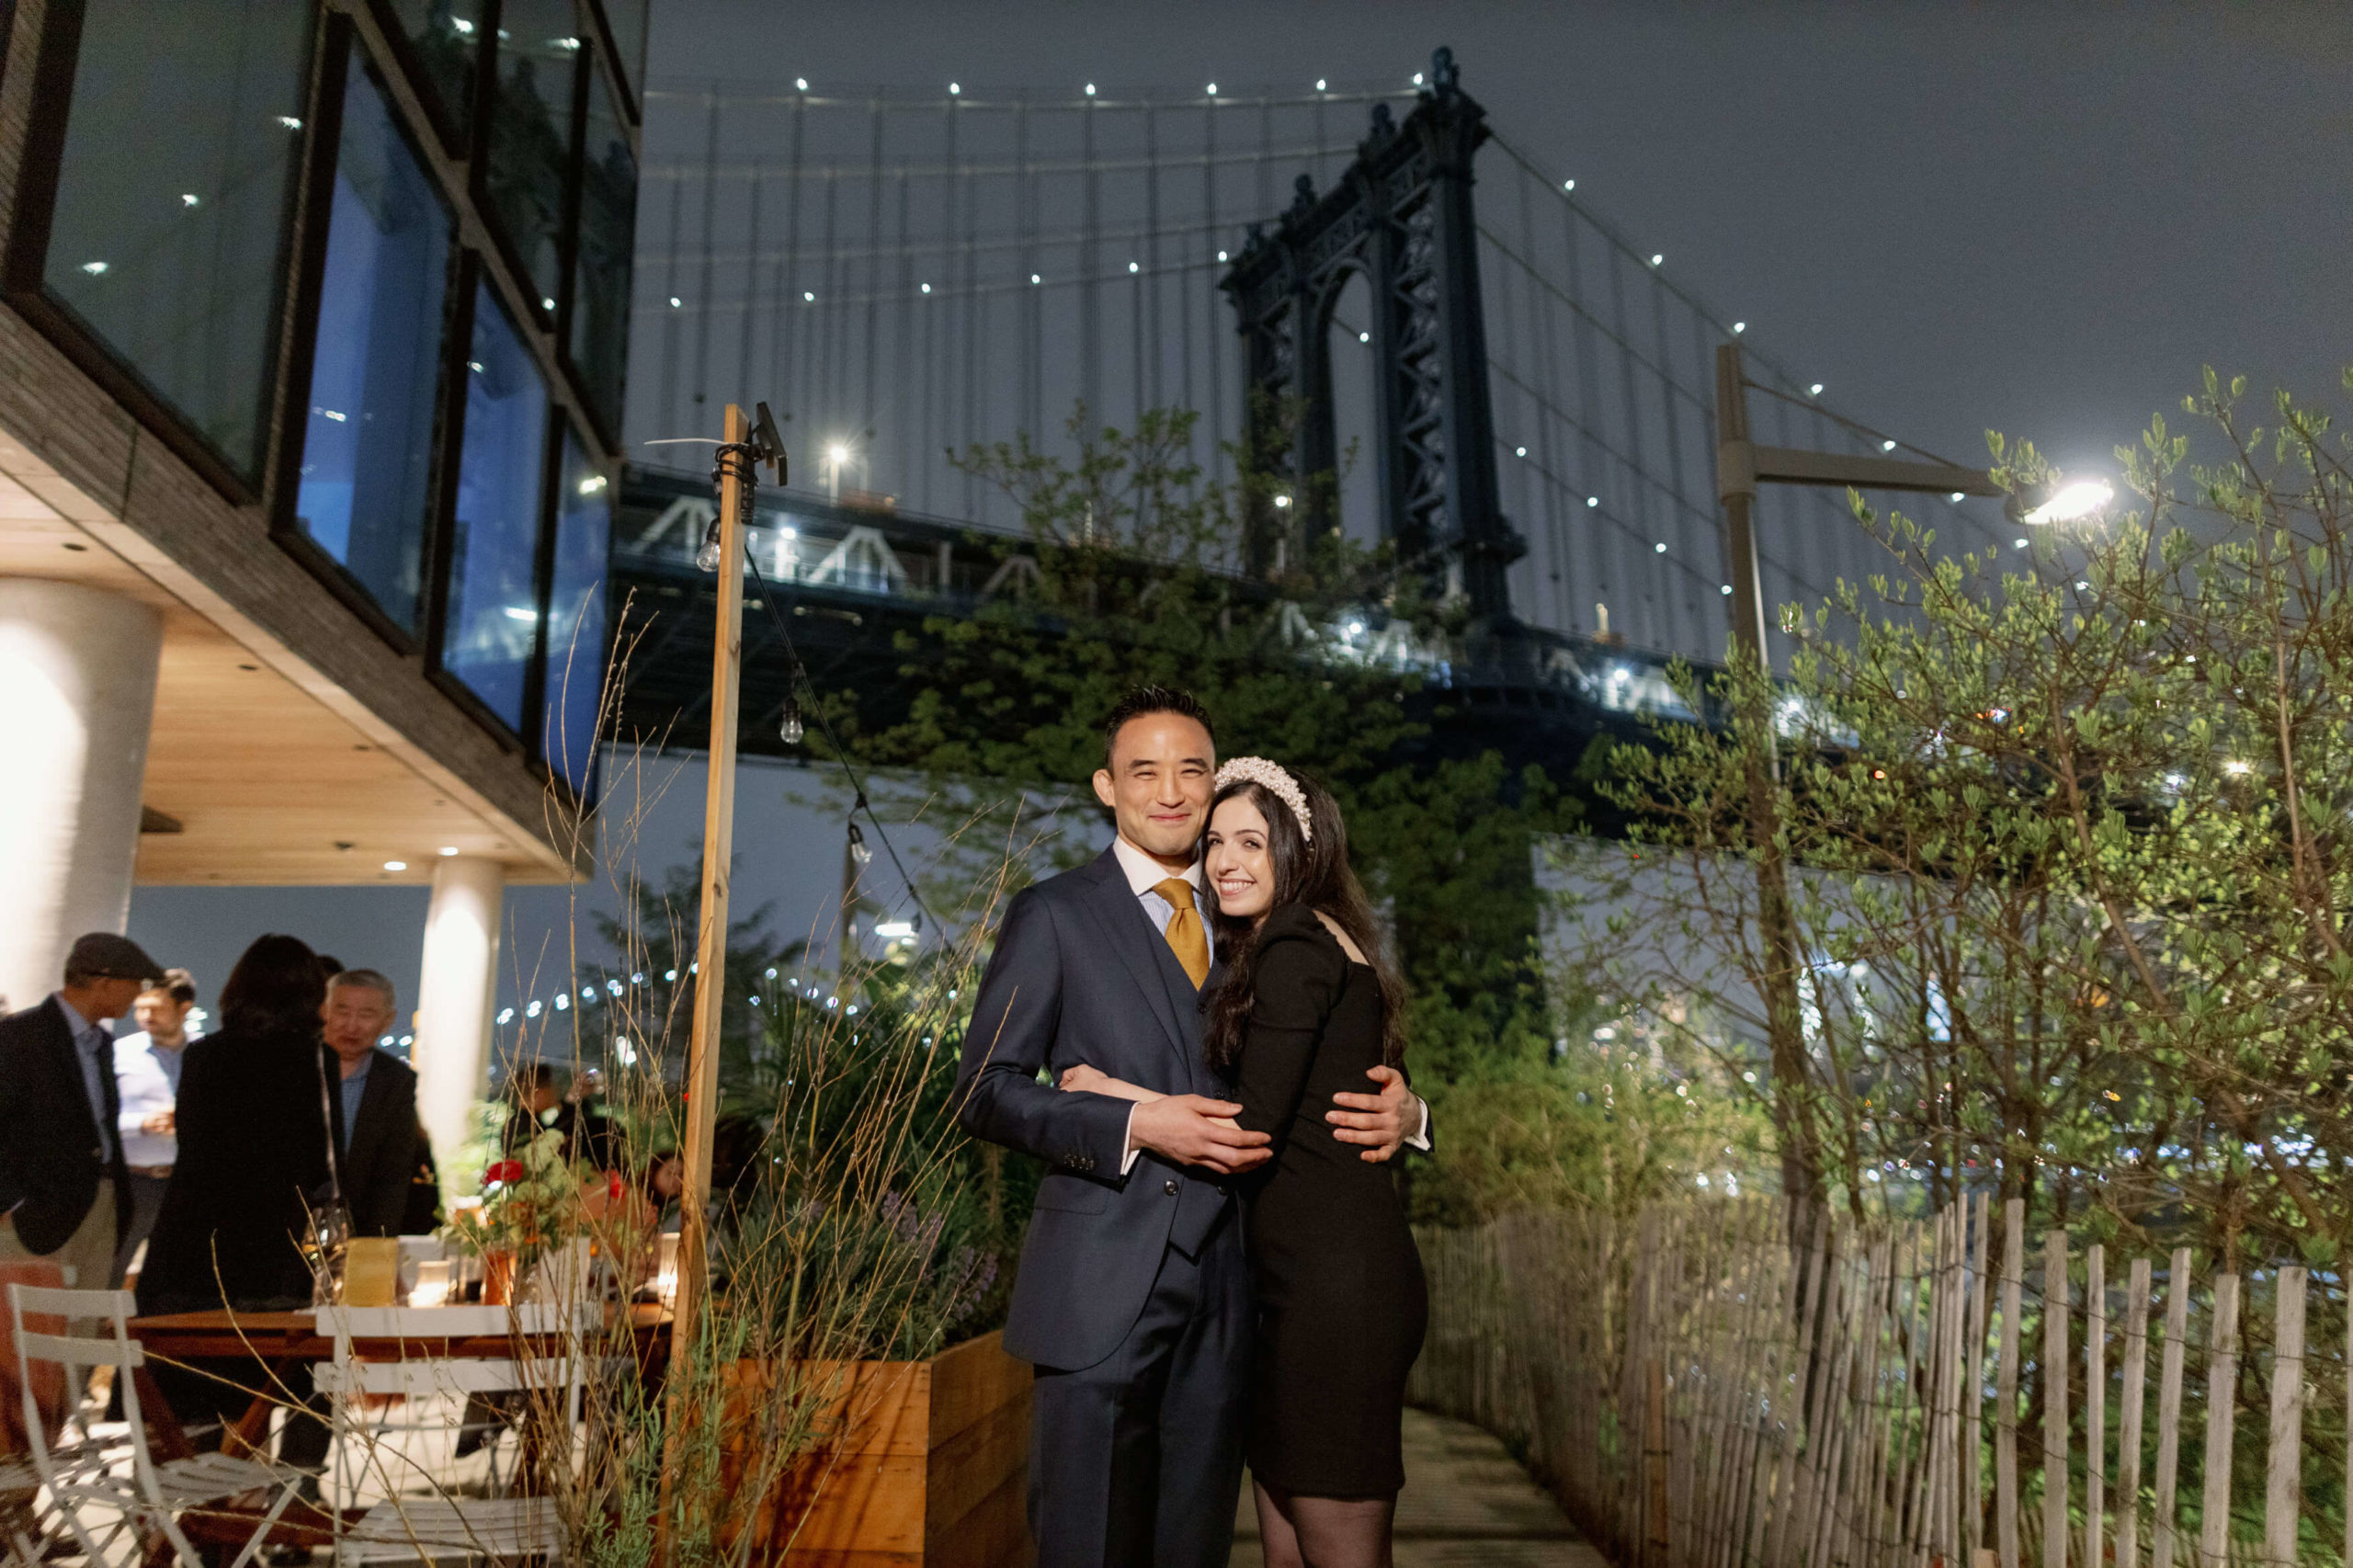 The bride and groom to be are happily hugging each other at a rehearsal dinner in The River Cafe NYC. Image by Jenny Fu Studio